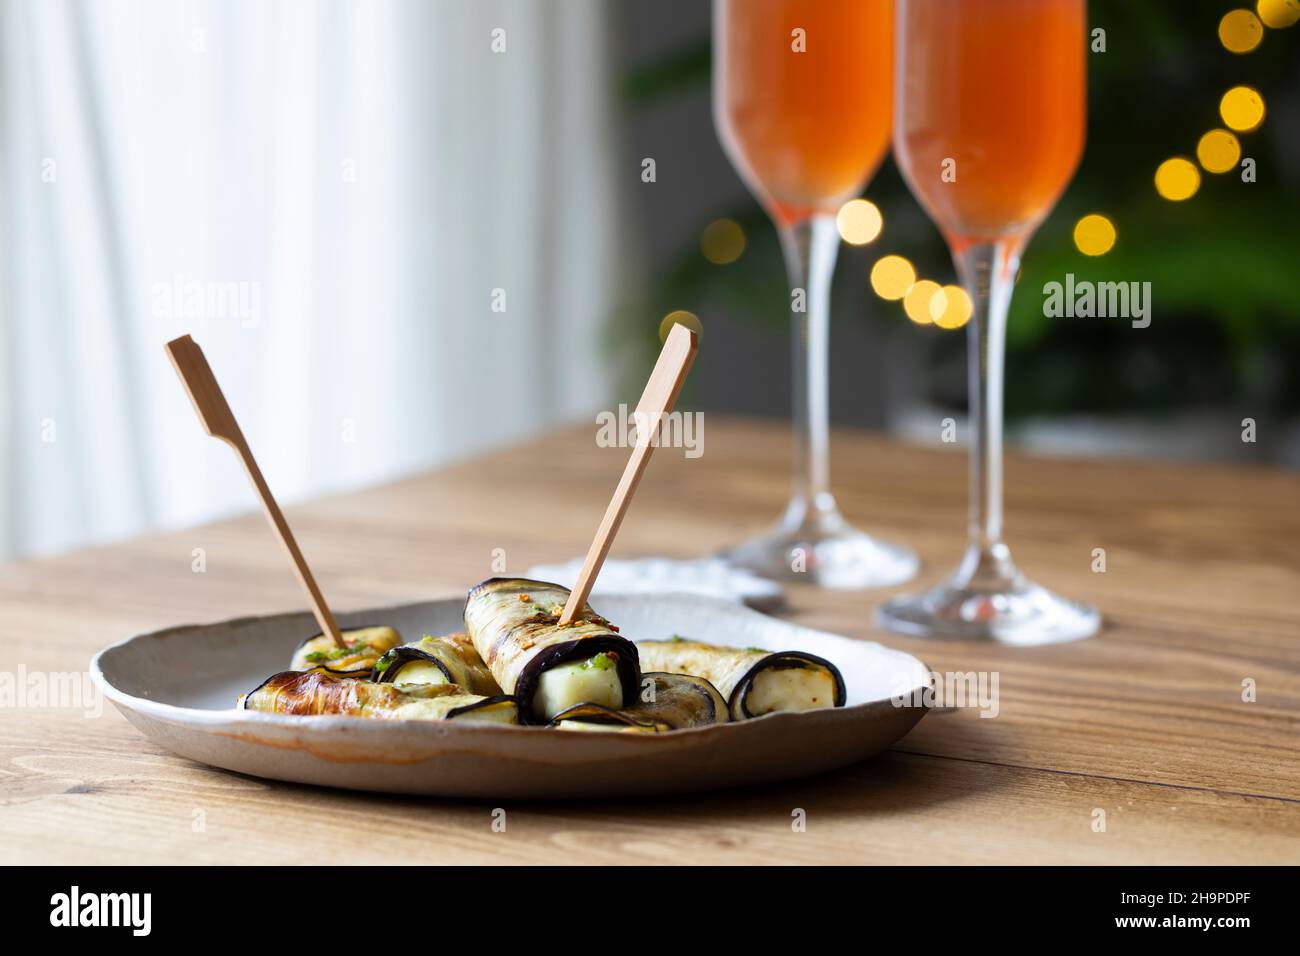 Vegetarian canapes of halloumi cheese wrapped in grilled aubergine Stock Photo